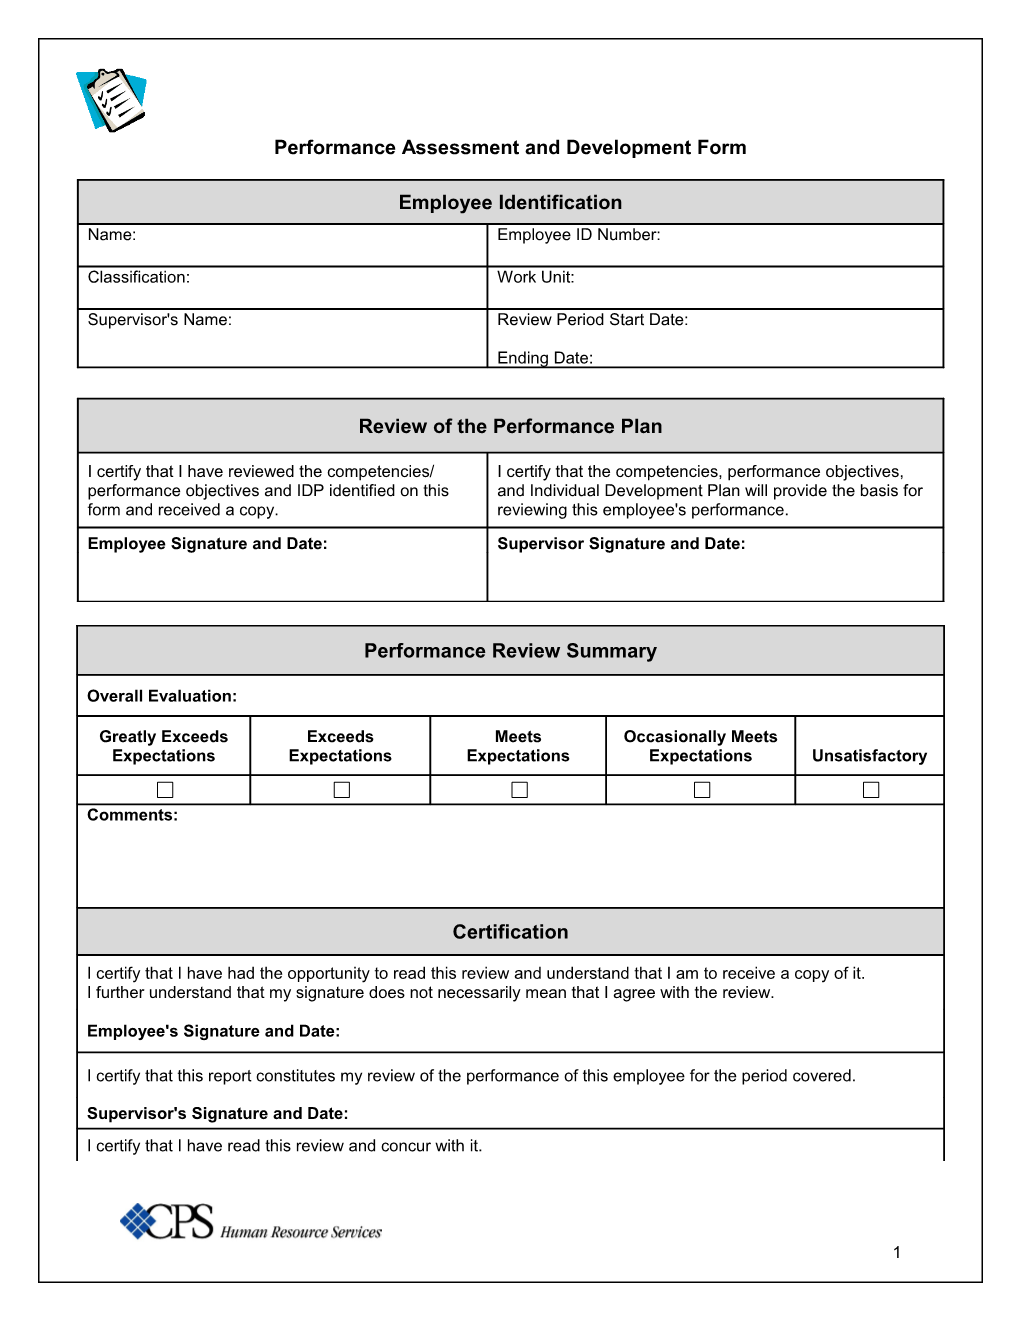 Performance Assessment and Development Form